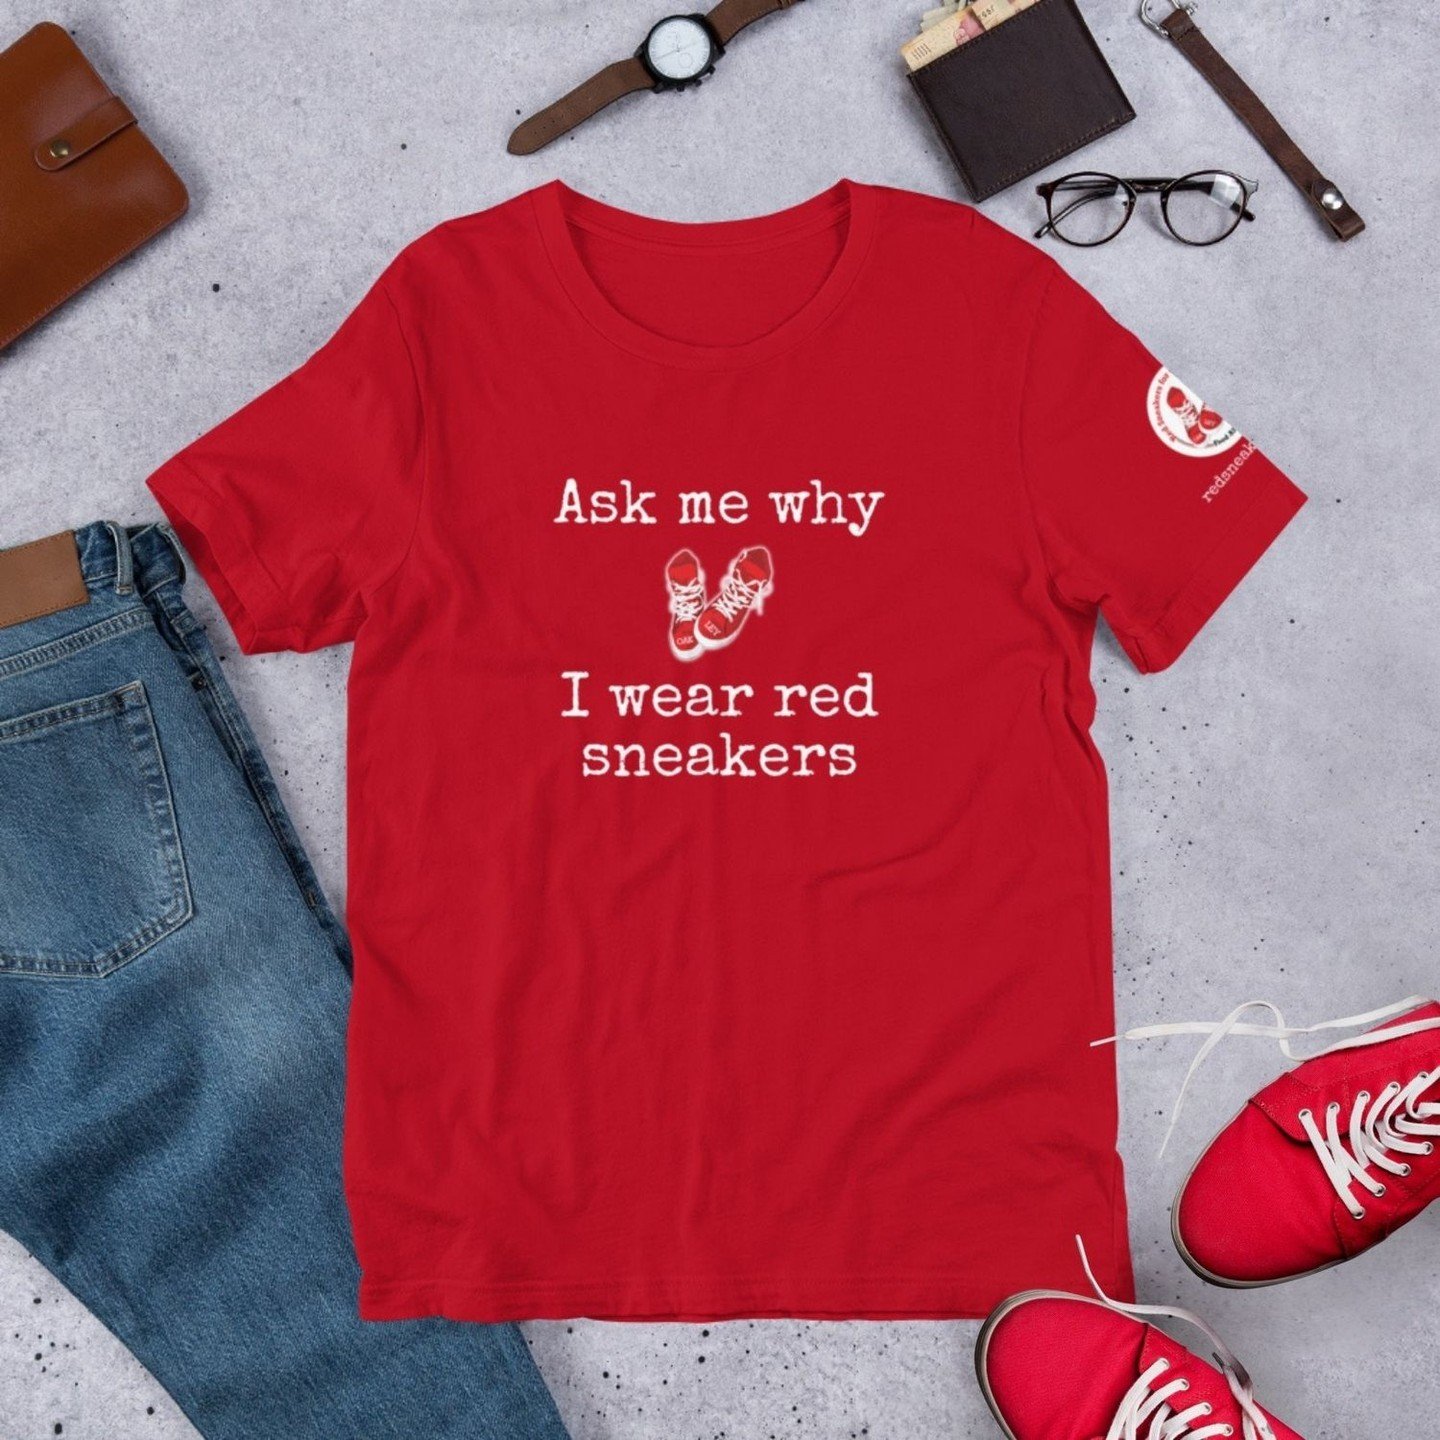 Are you ready for #InternationalRedSneakersDay on May 20th? It's a global movement dedicated to #foodallergyawareness! Get ready for the big day and shop our merchandise! 👉 redsneakers.org/shop

Wanna learn how to participate on May 20th? Visit reds